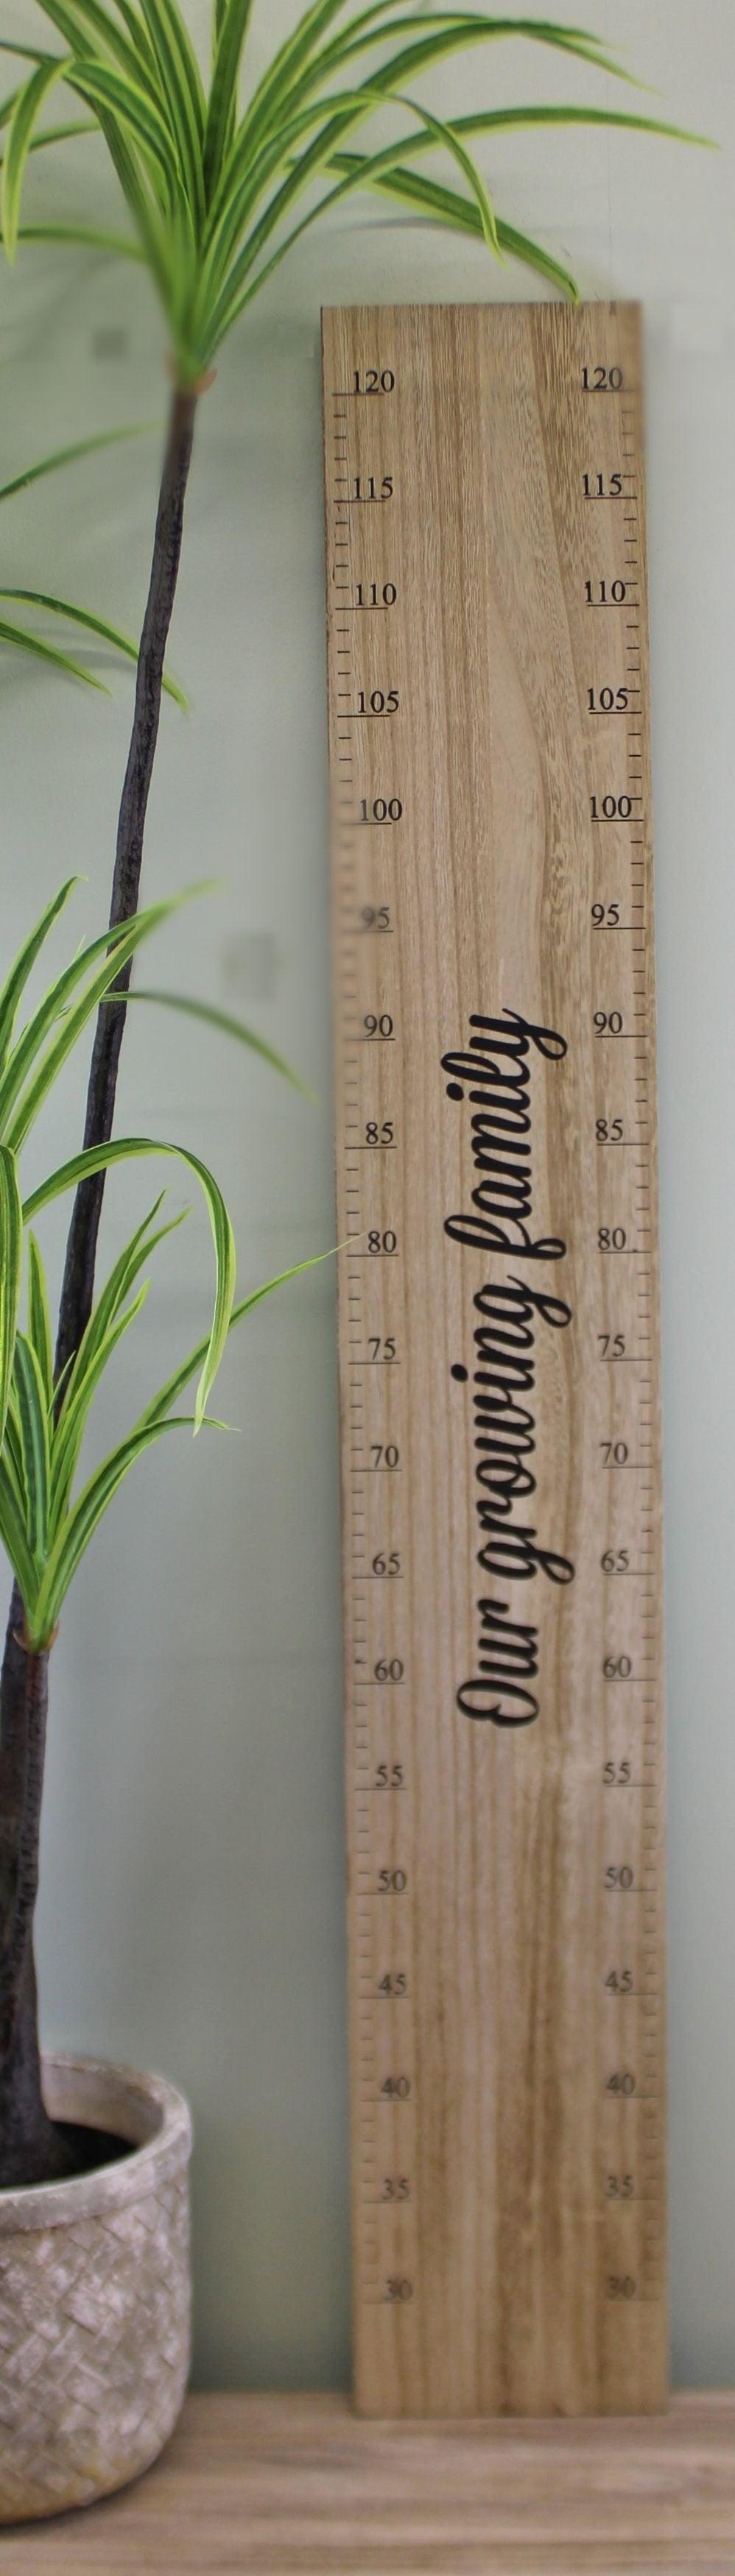 Height Chart Wall Plaque, Our Growing Family, 100cm - £20.99 - Blackboards, Memo Boards & Calendars 